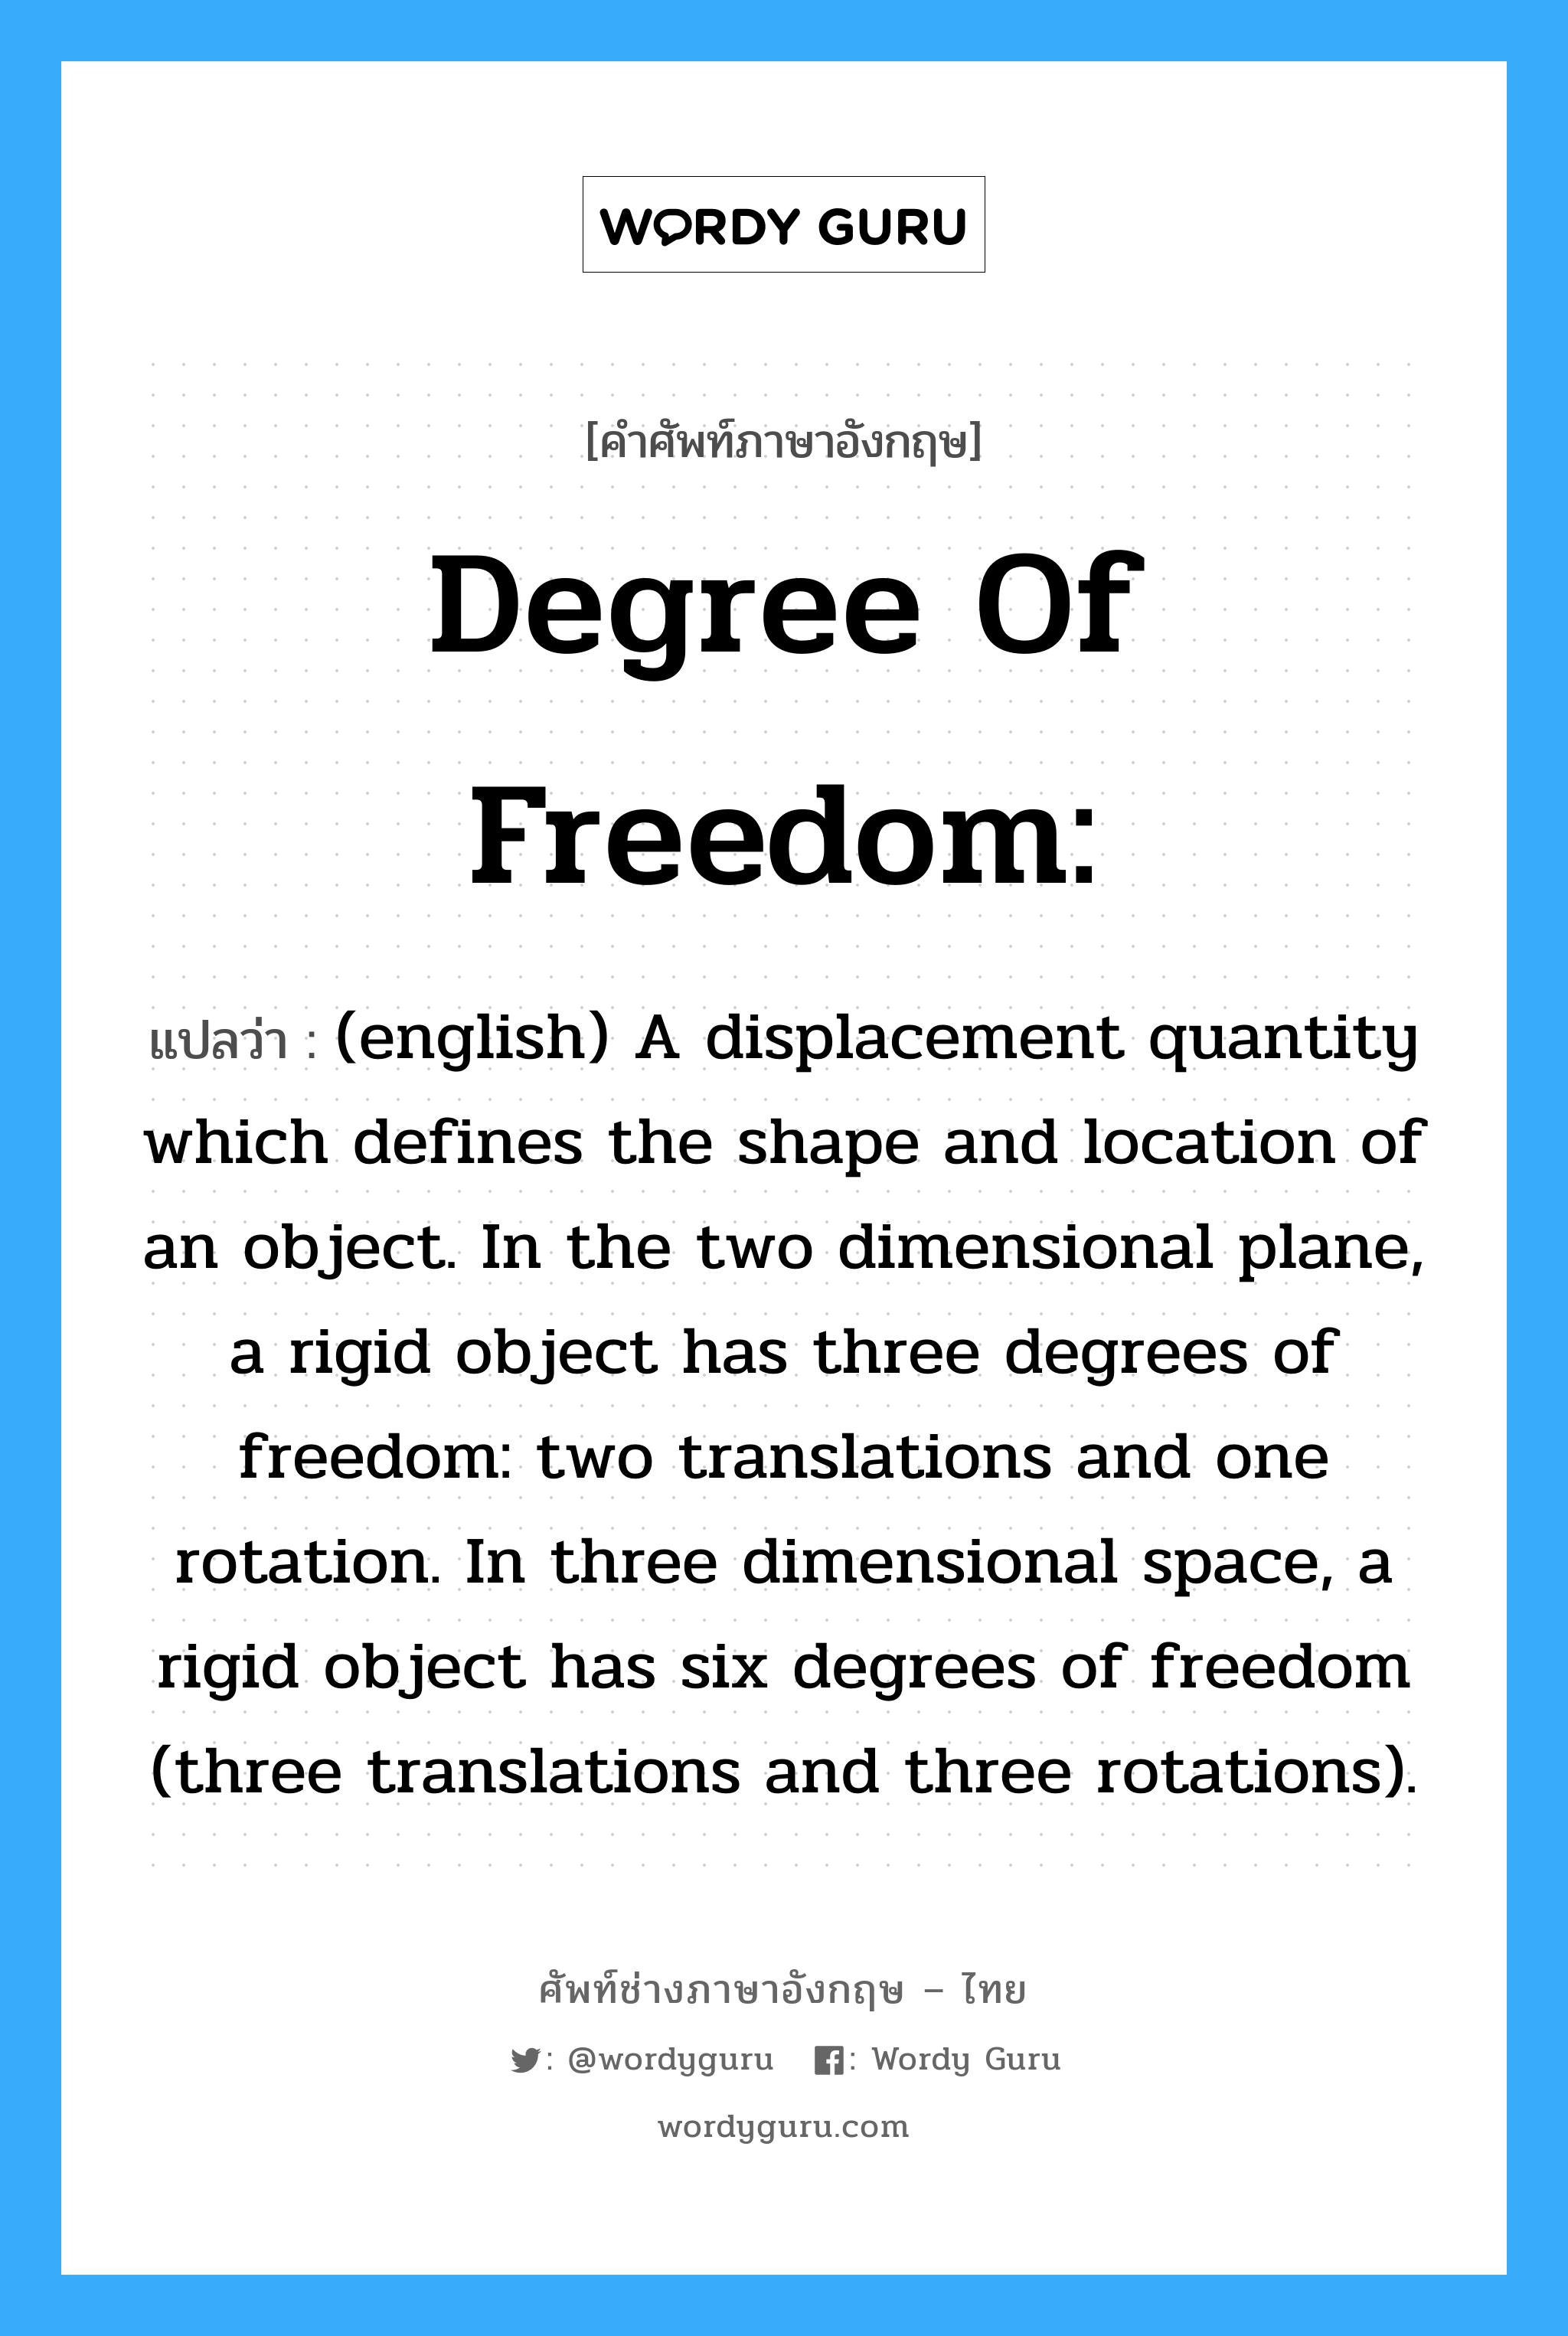 (english) A displacement quantity which defines the shape and location of an object. In the two dimensional plane, a rigid object has three degrees of freedom: two translations and one rotation. In three dimensional space, a rigid object has six degrees of freedom (three translations and three rotations). ภาษาอังกฤษ?, คำศัพท์ช่างภาษาอังกฤษ - ไทย (english) A displacement quantity which defines the shape and location of an object. In the two dimensional plane, a rigid object has three degrees of freedom: two translations and one rotation. In three dimensional space, a rigid object has six degrees of freedom (three translations and three rotations). คำศัพท์ภาษาอังกฤษ (english) A displacement quantity which defines the shape and location of an object. In the two dimensional plane, a rigid object has three degrees of freedom: two translations and one rotation. In three dimensional space, a rigid object has six degrees of freedom (three translations and three rotations). แปลว่า Degree of Freedom: